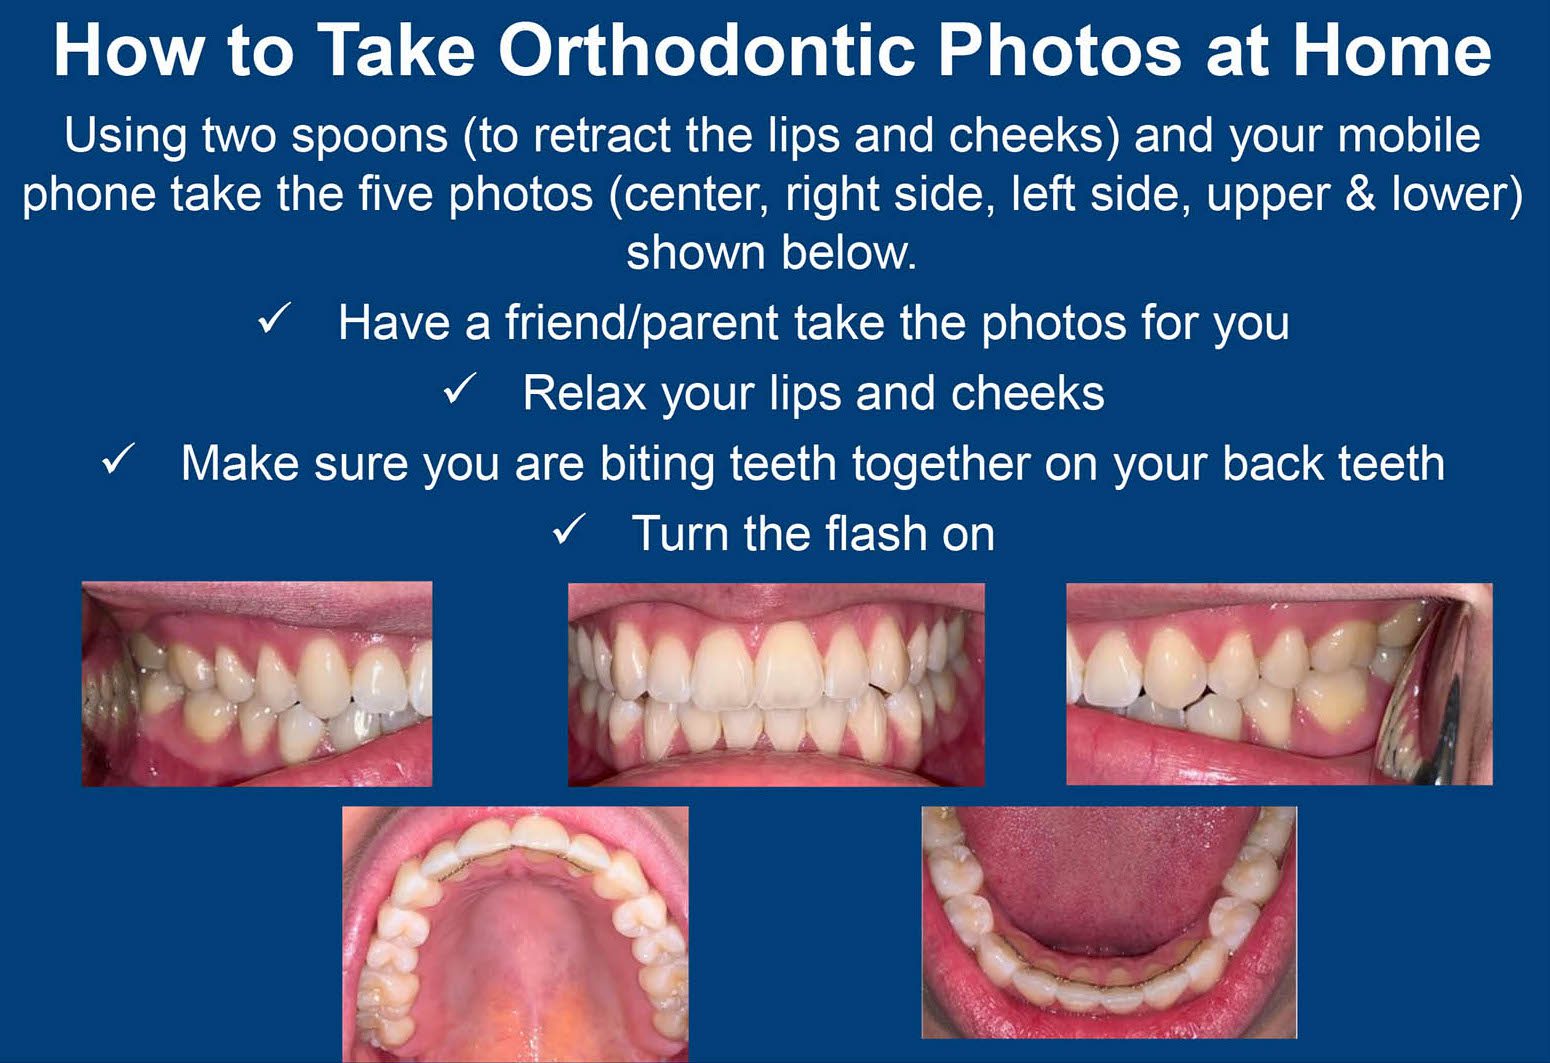 How to Take Orthodontic Photos at Home